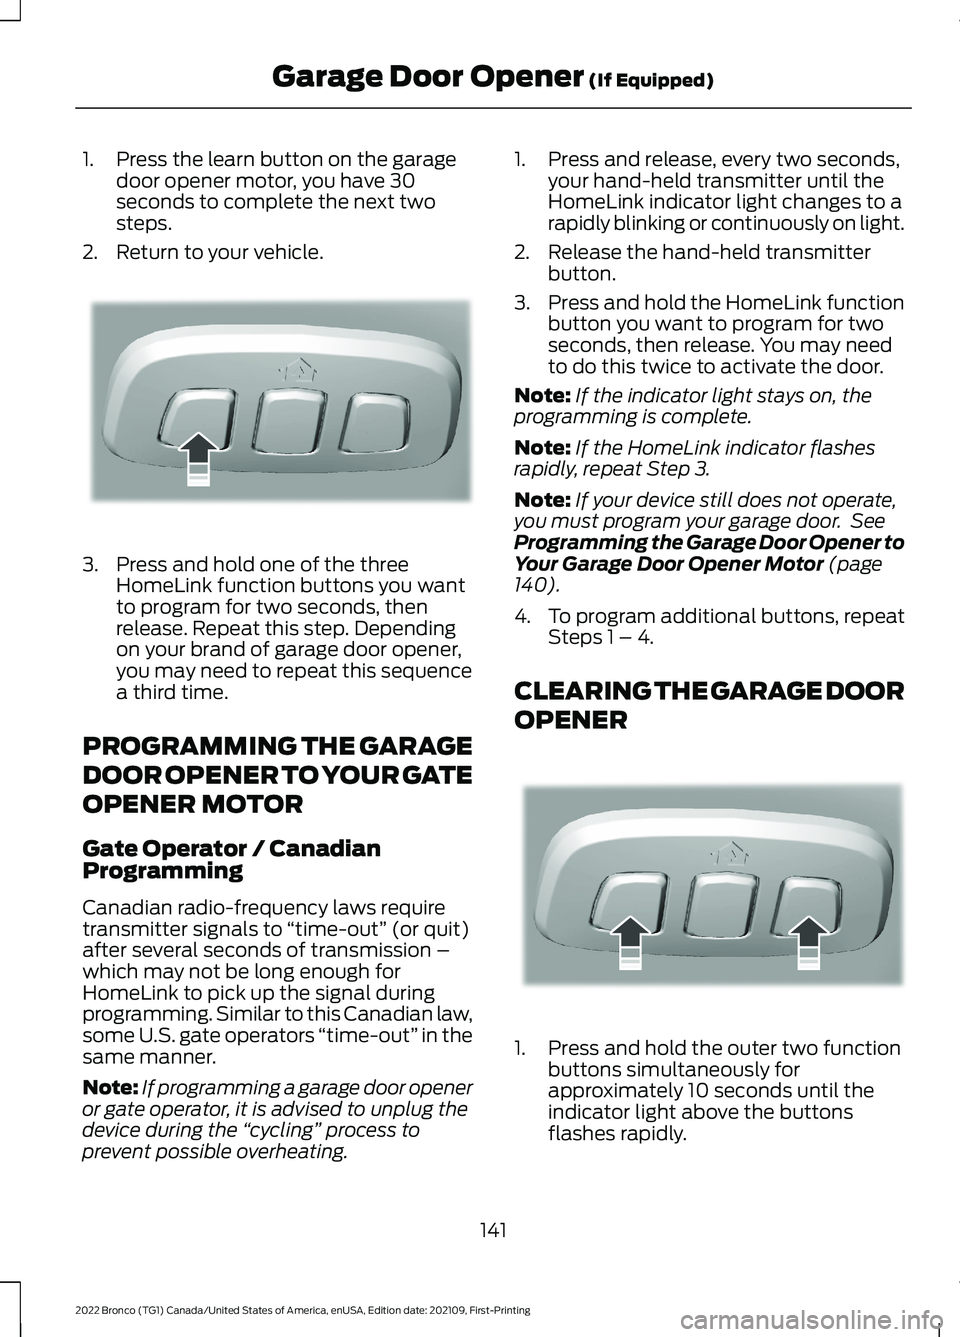 FORD BRONCO 2022  Owners Manual 1.Press the learn button on the garagedoor opener motor, you have 30seconds to complete the next twosteps.
2.Return to your vehicle.
3.Press and hold one of the threeHomeLink function buttons you want